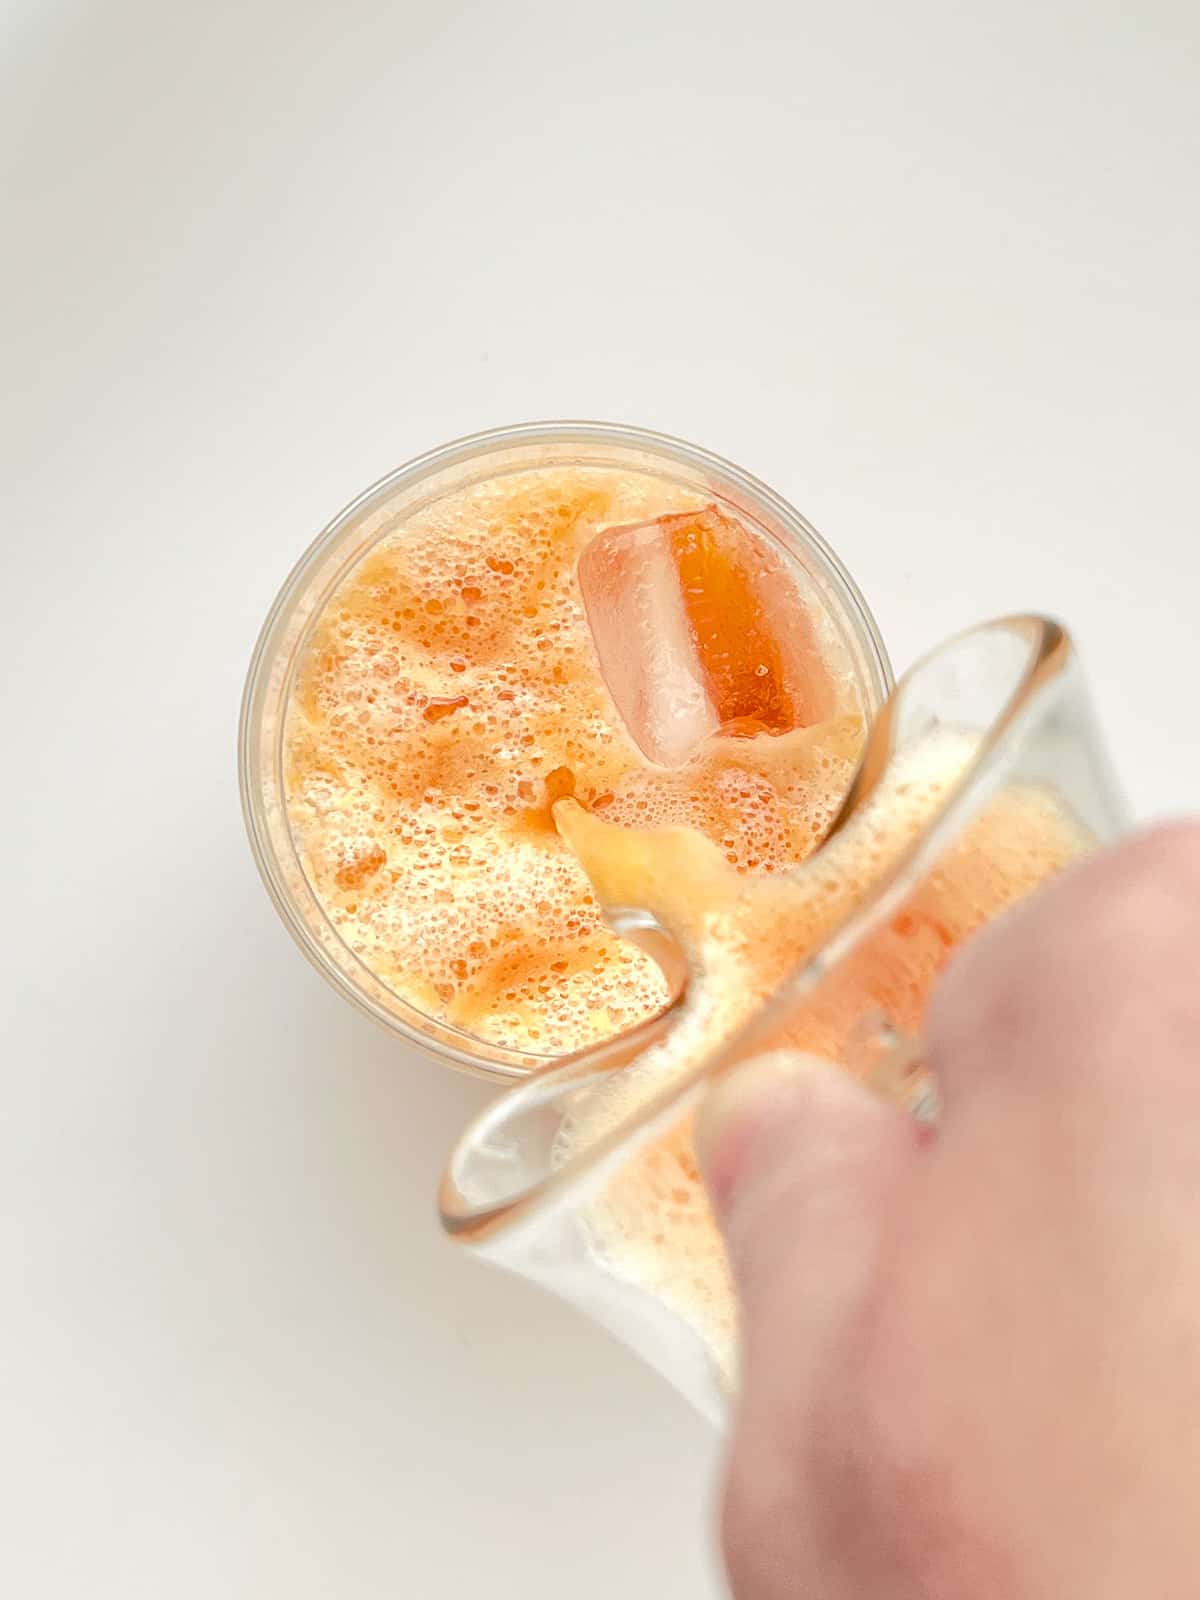 An image of an orange colour drink being poured into a glass.